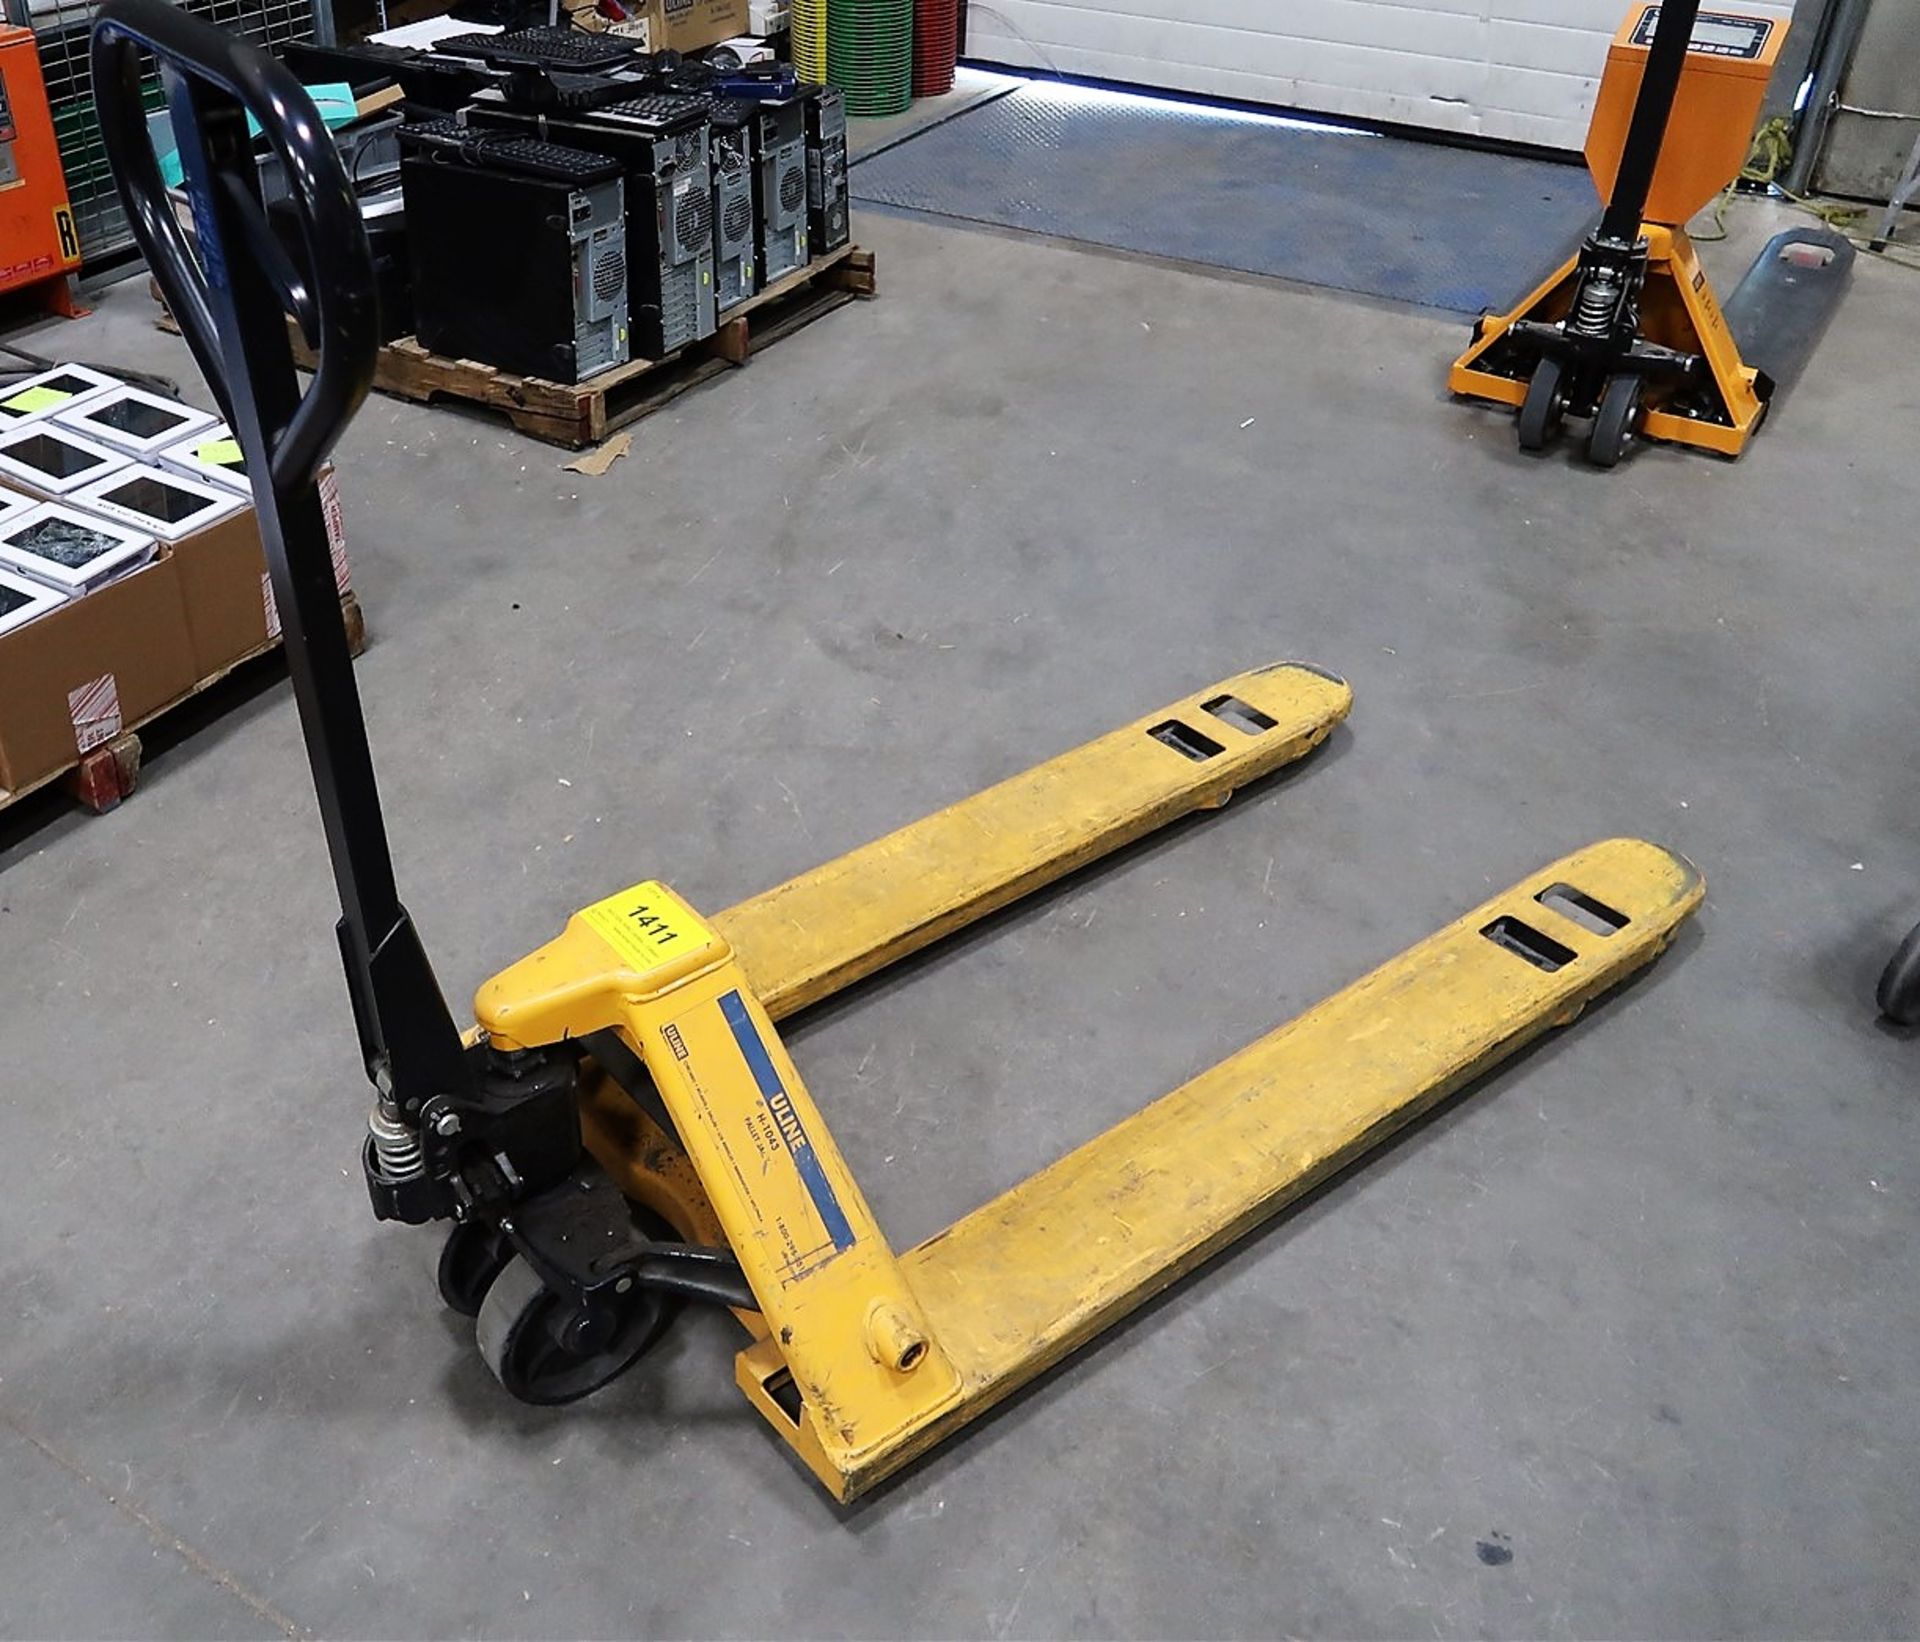 ULINE H-1043 PALLET JACK (SUBJECT TO LATE REMOVAL, PICKUP ON JULY 7TH)